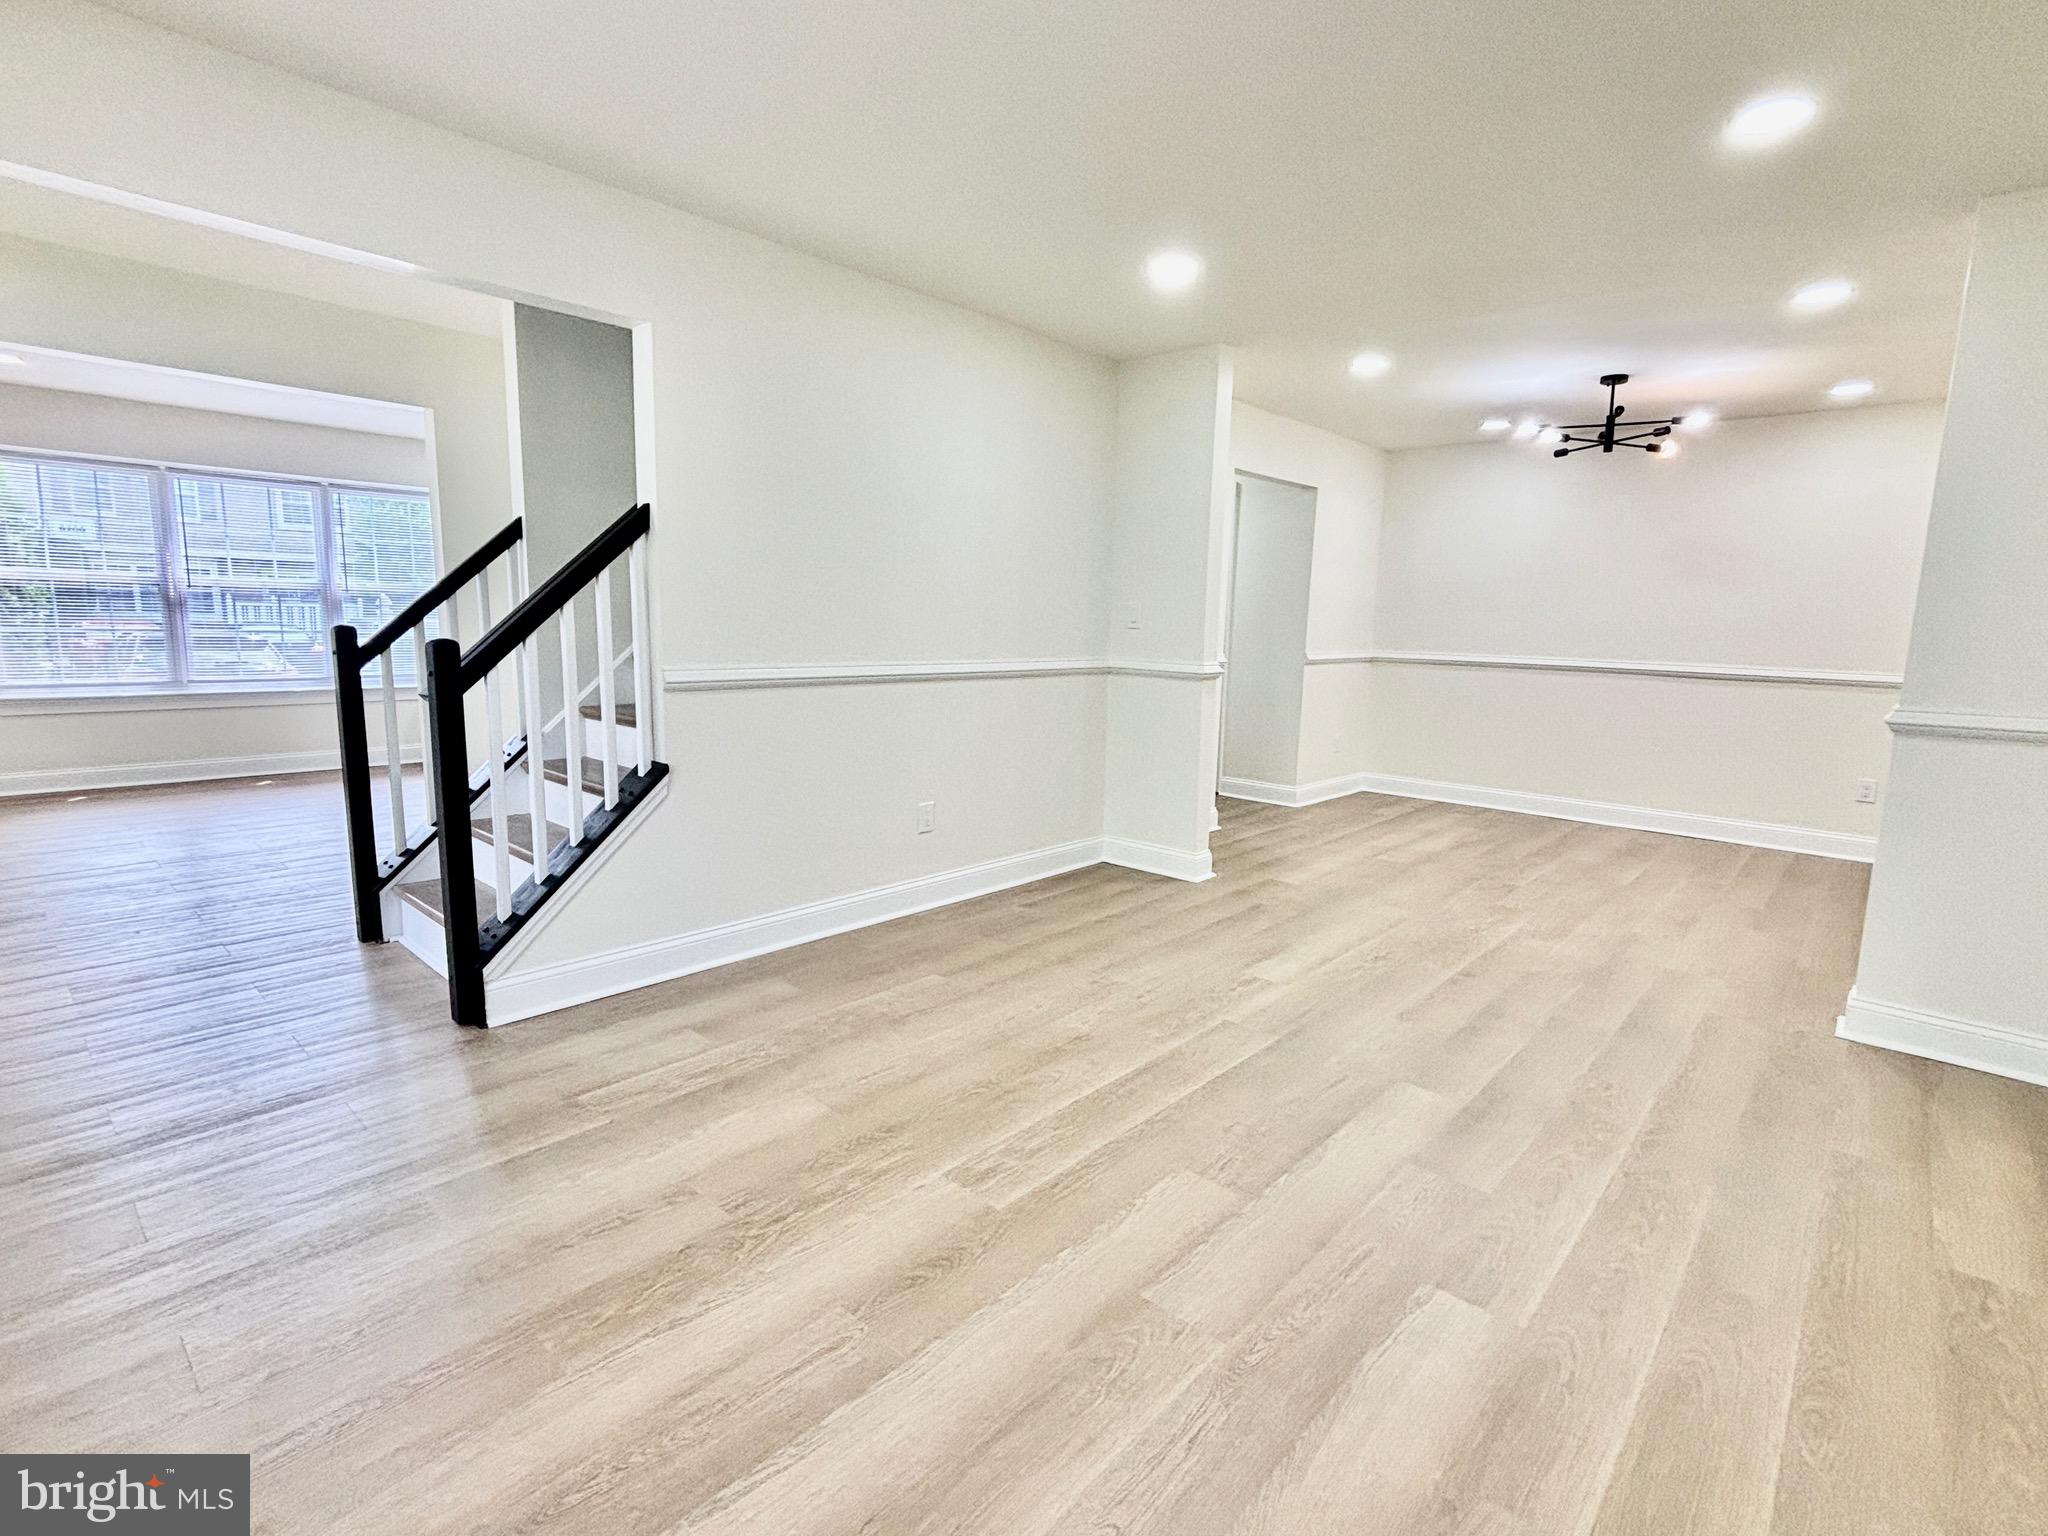 a view of an empty room with stairs and a ceiling fan